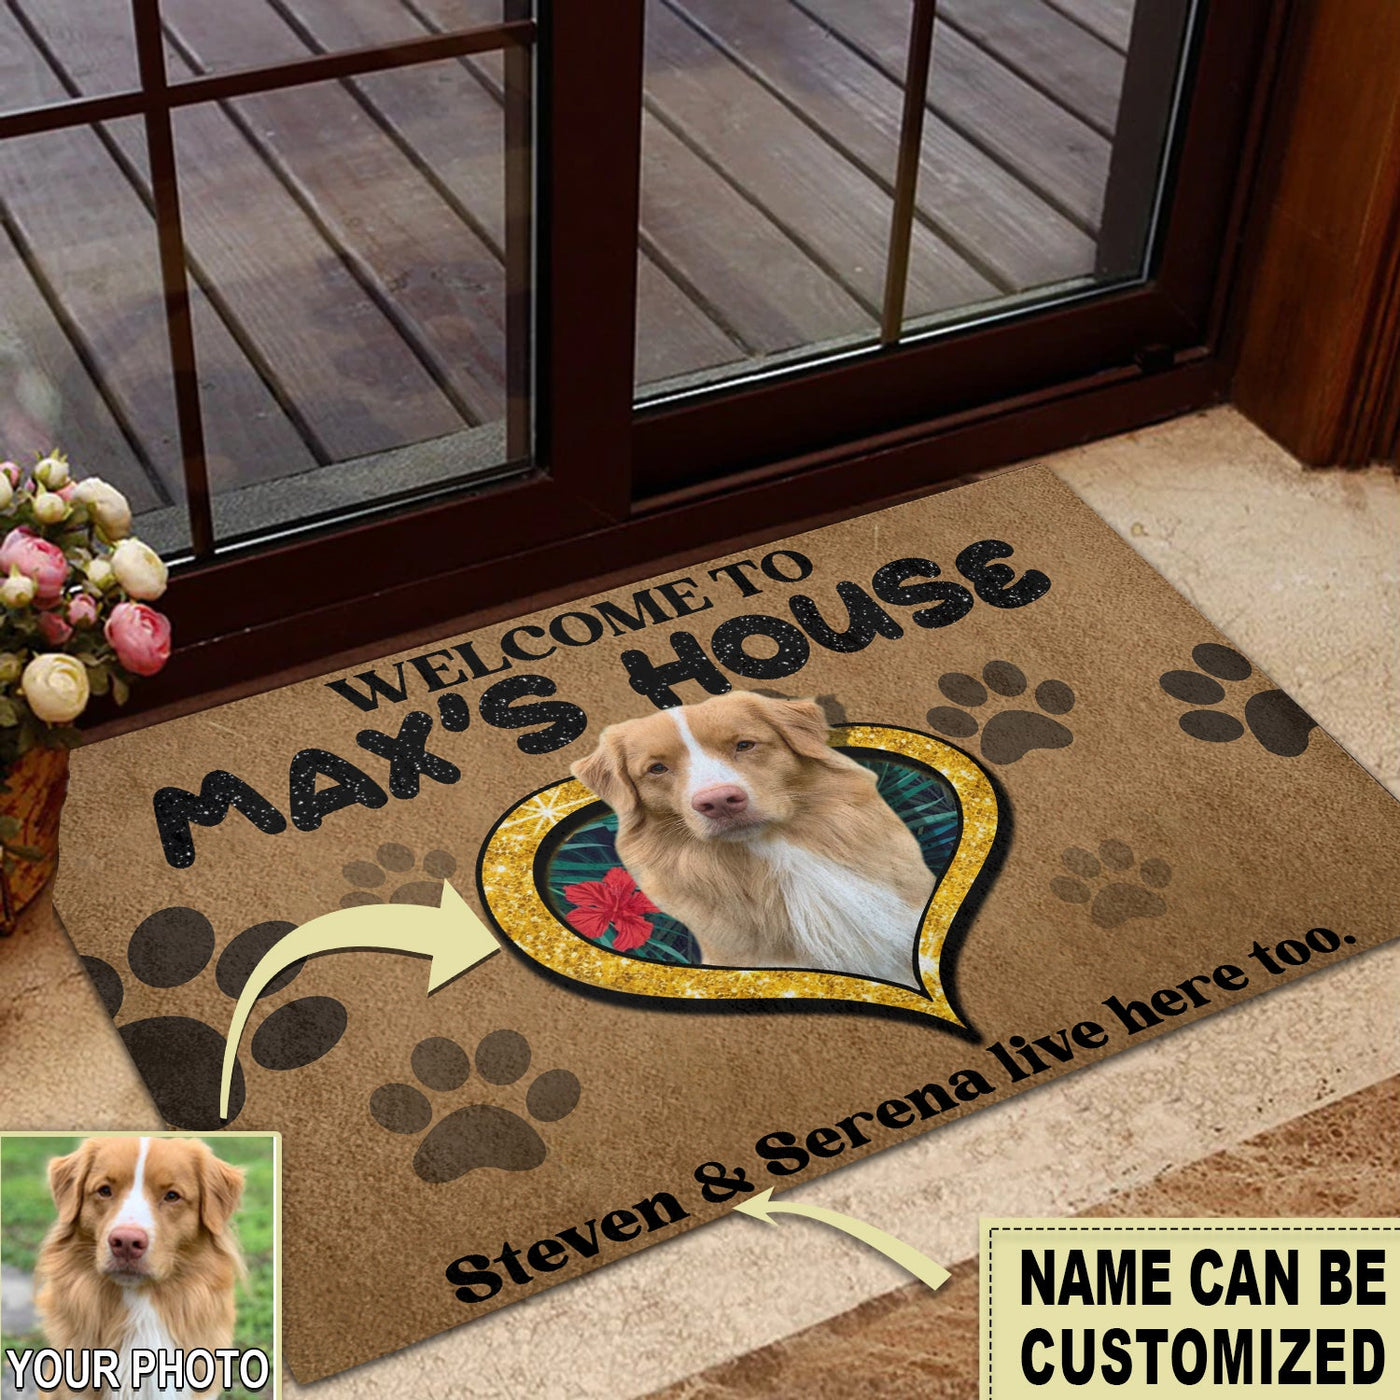 Dog Welcome To The Dog's House Custom Photo Personalized - Doormat - Owls Matrix LTD